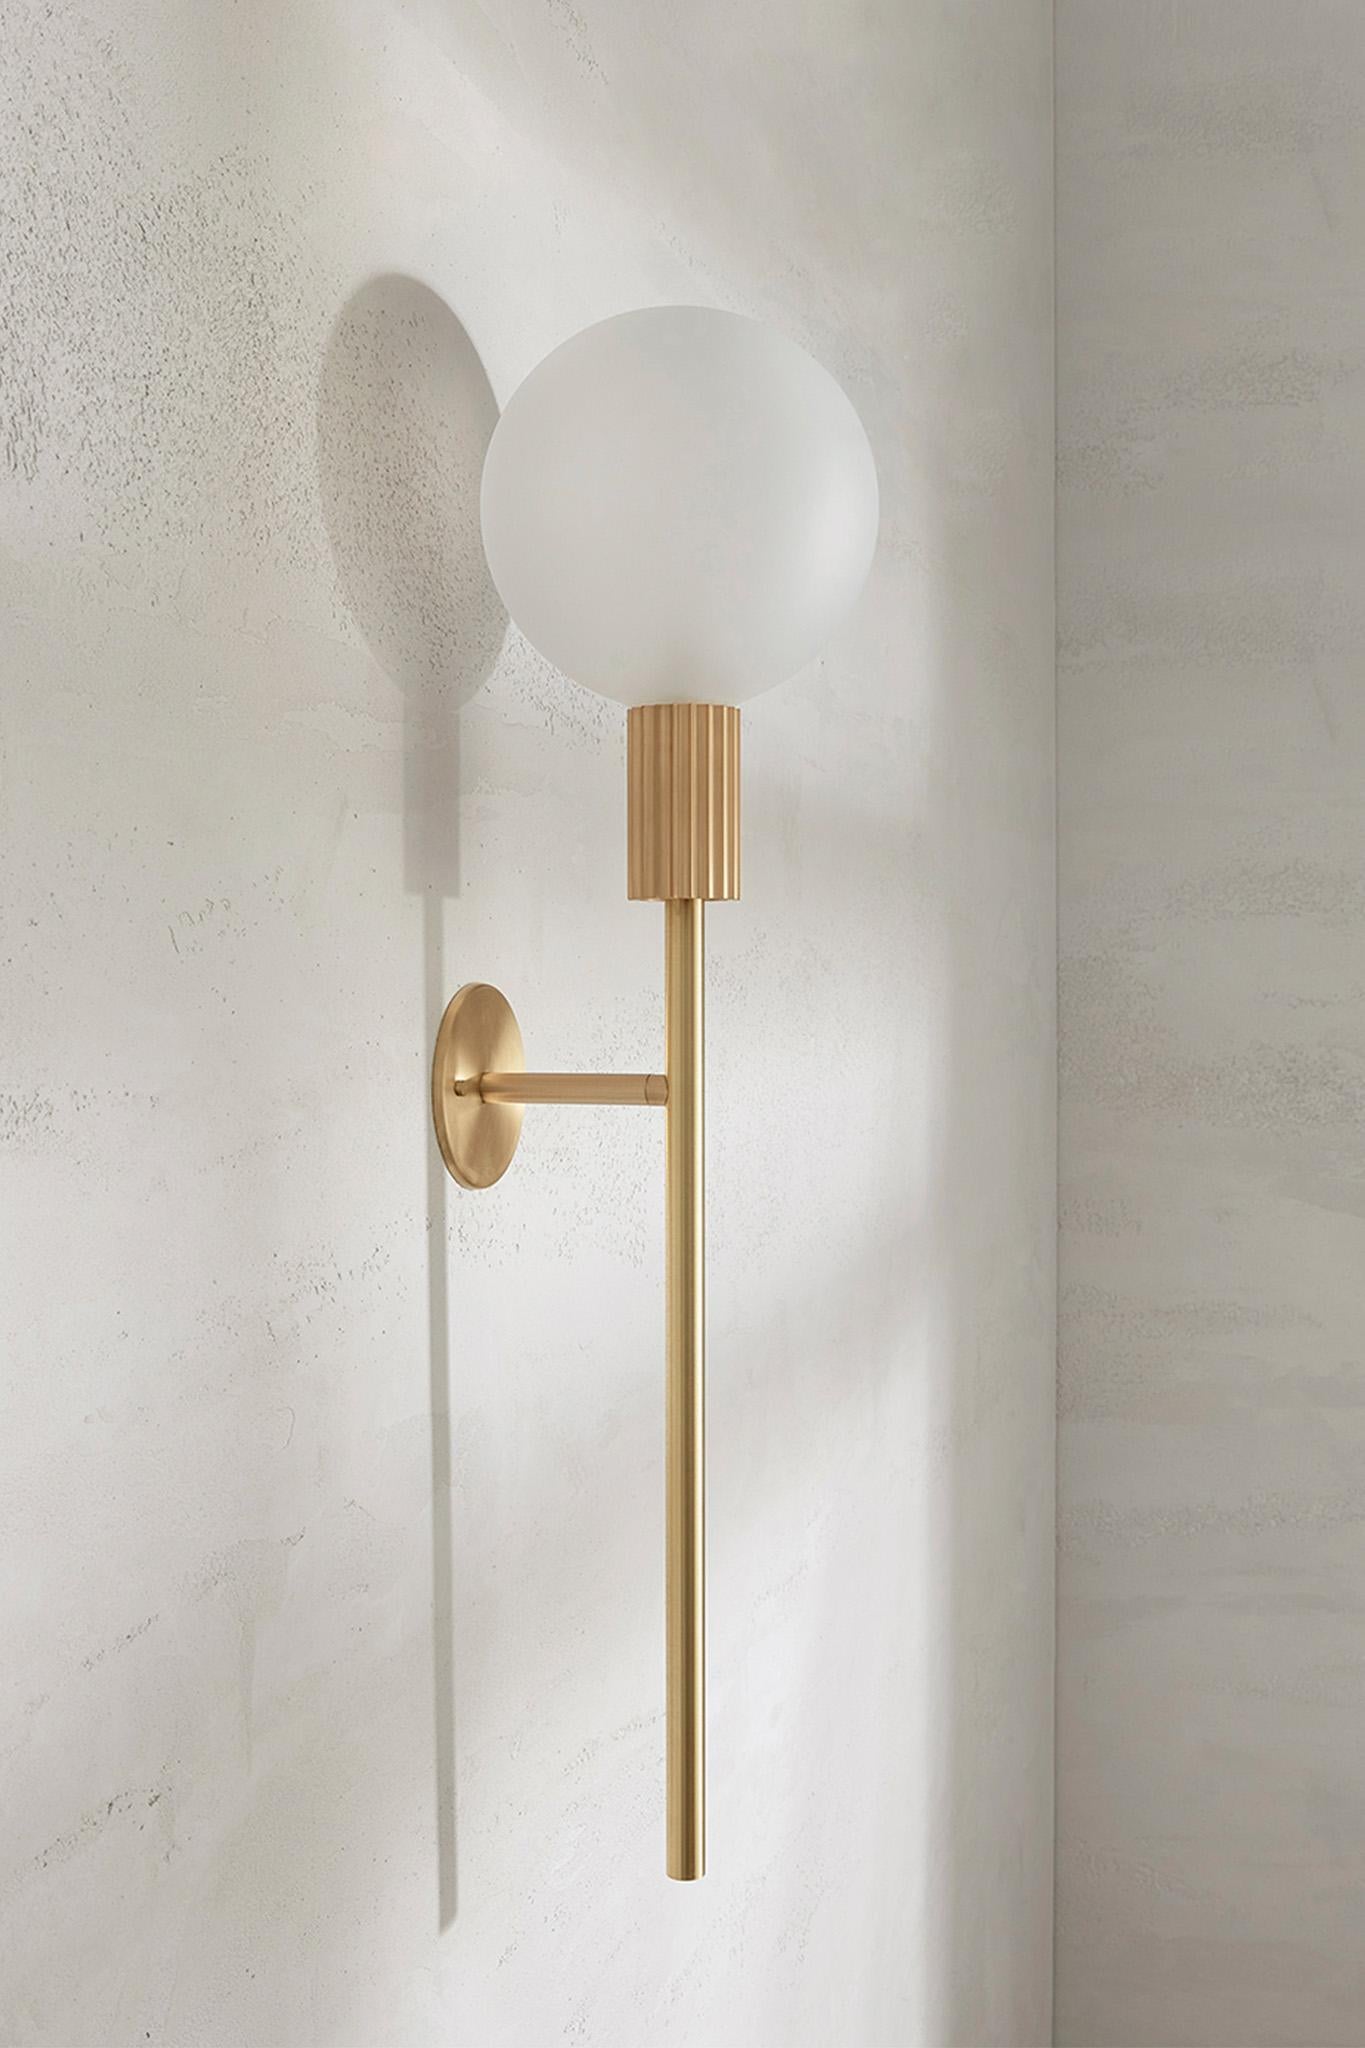 The Attalos Wall Light, 200 is a new addition to the current Attalos range and retains its classical sculptural aesthetic echoing ancient Greek architectural forms. Incorporating an LED frosted globe counterbalanced on a base and post machined from